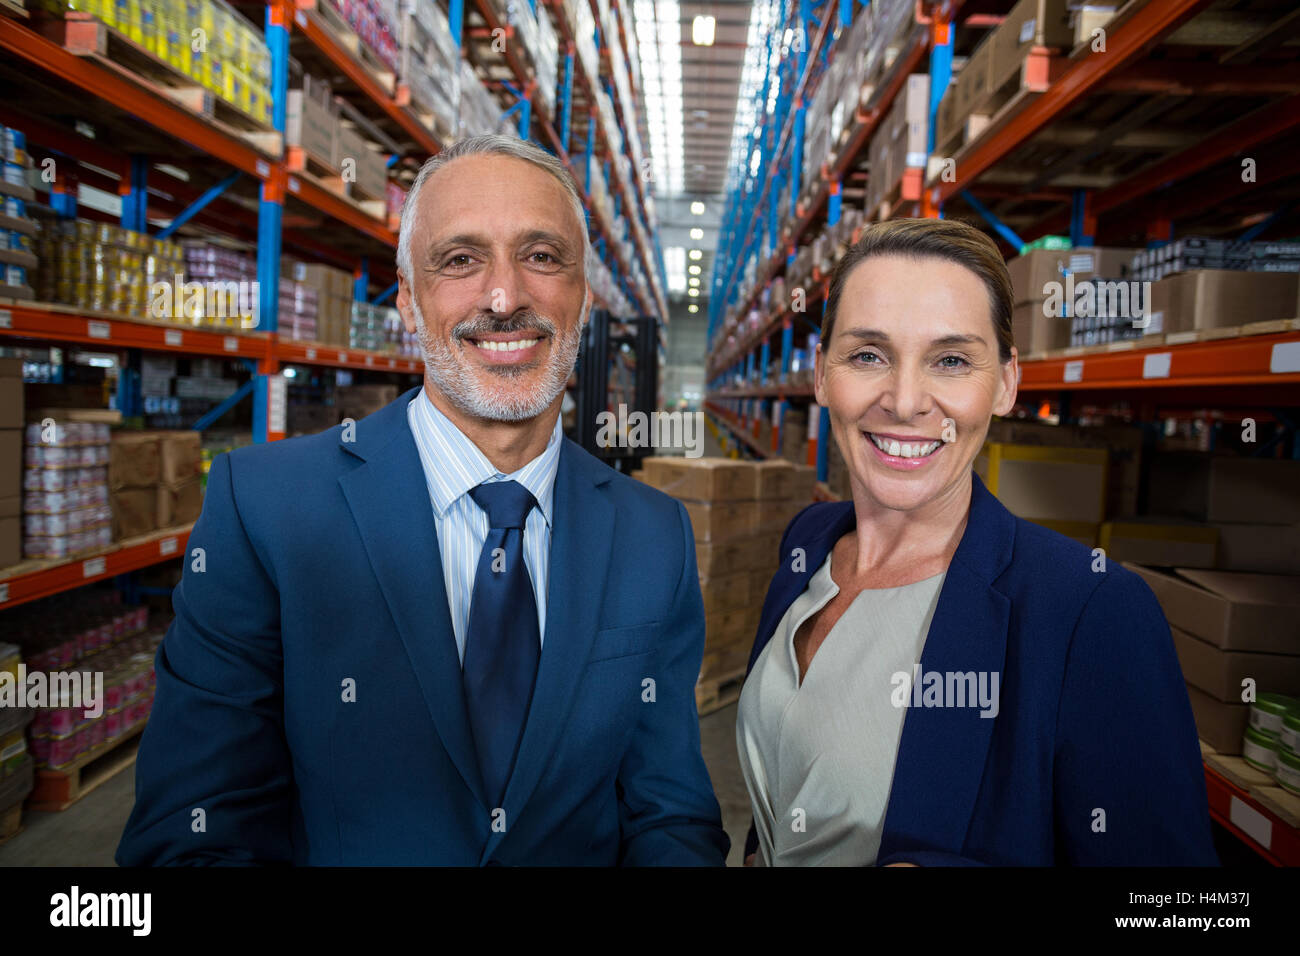 Portrait of warehouse manager and client smiling Stock Photo